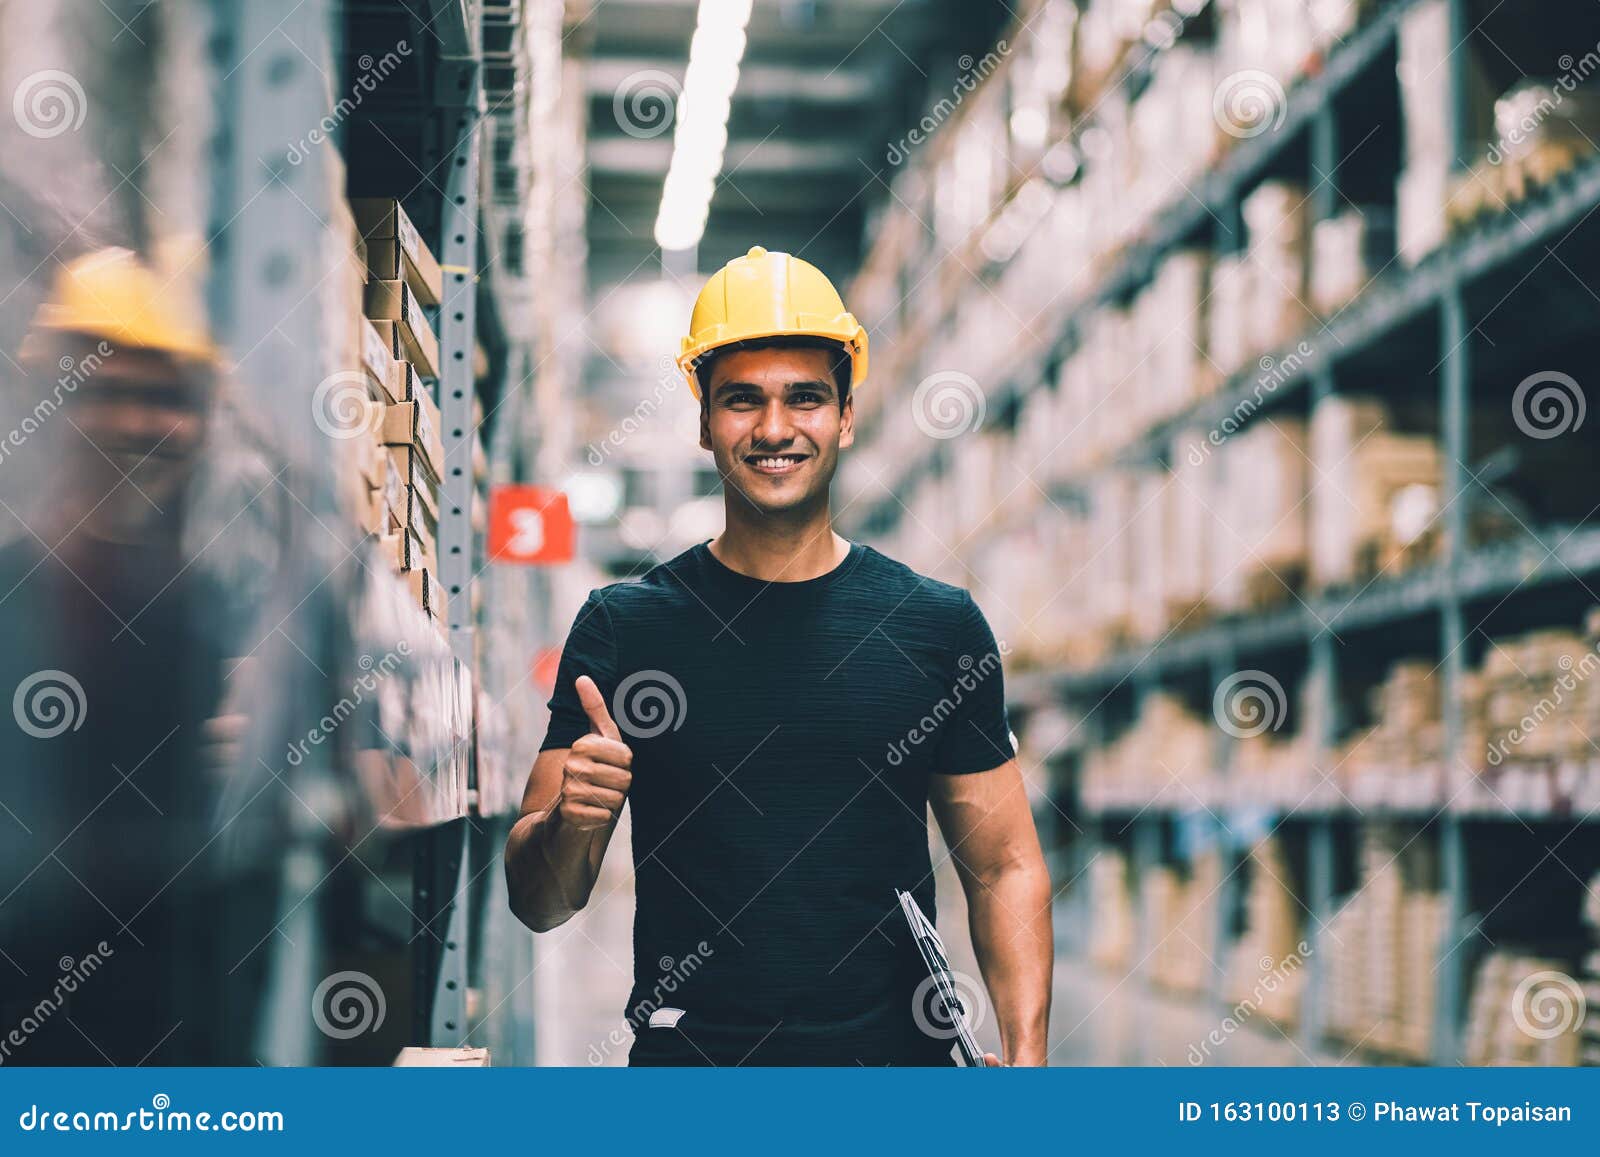 smart indian engineer man worker wearing safety helmet doing stocktaking of product management in cardboard box on shelves